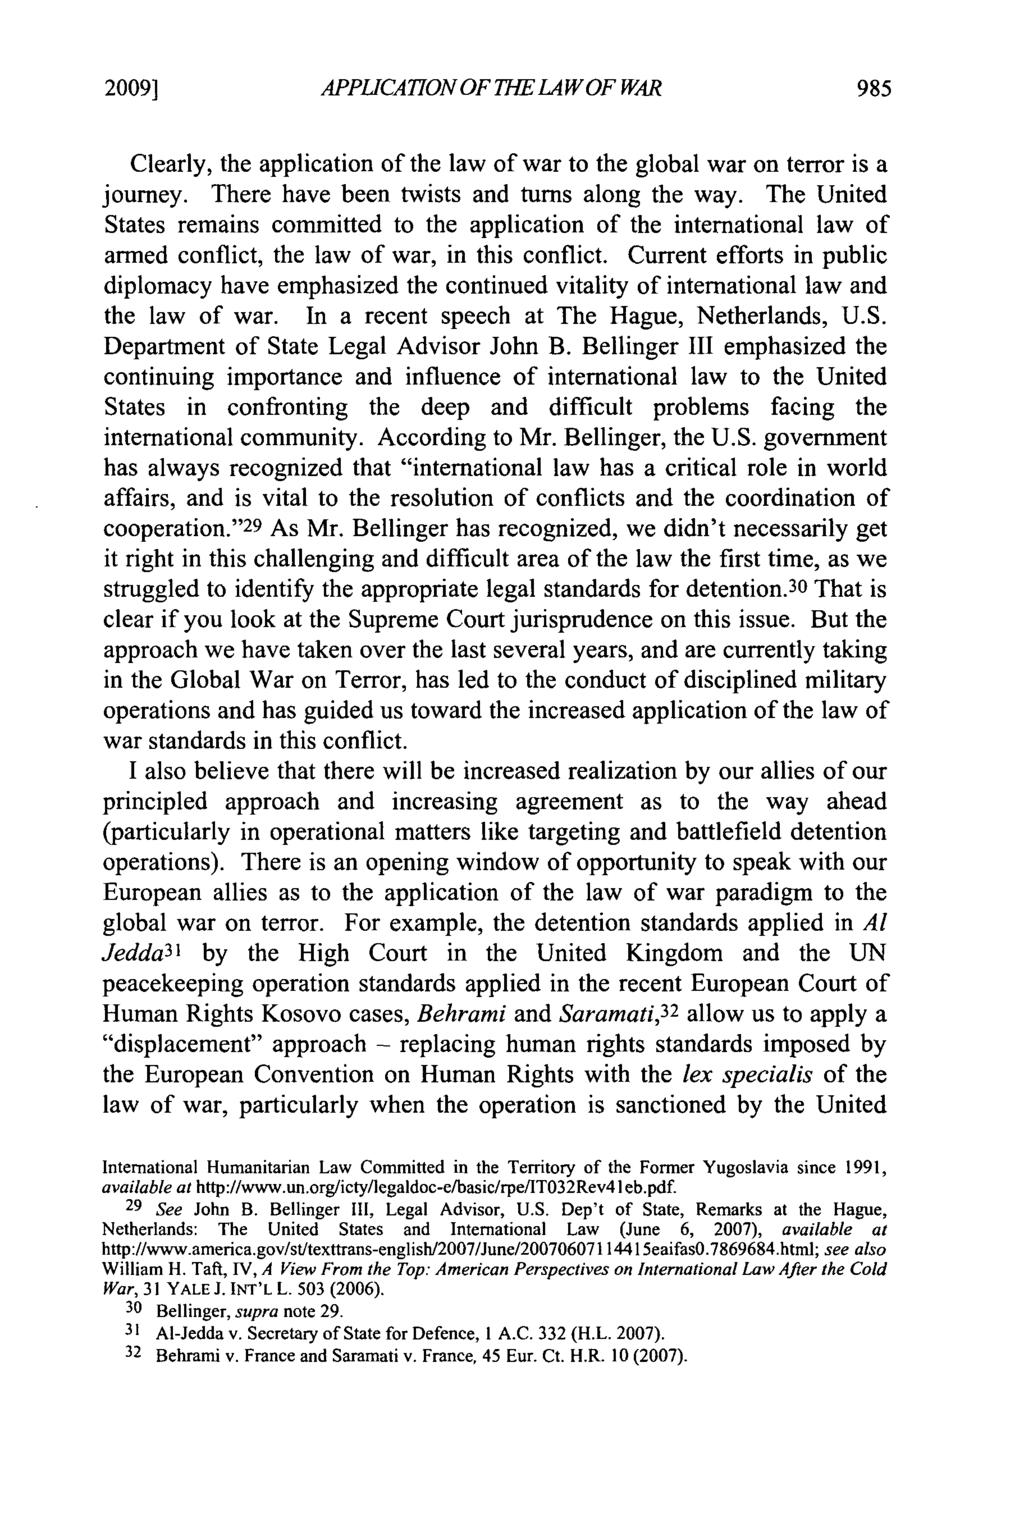 2009] APPLICATION OF THE LAW OF WAR Clearly, the application of the law of war to the global war on terror is a journey. There have been twists and turns along the way.